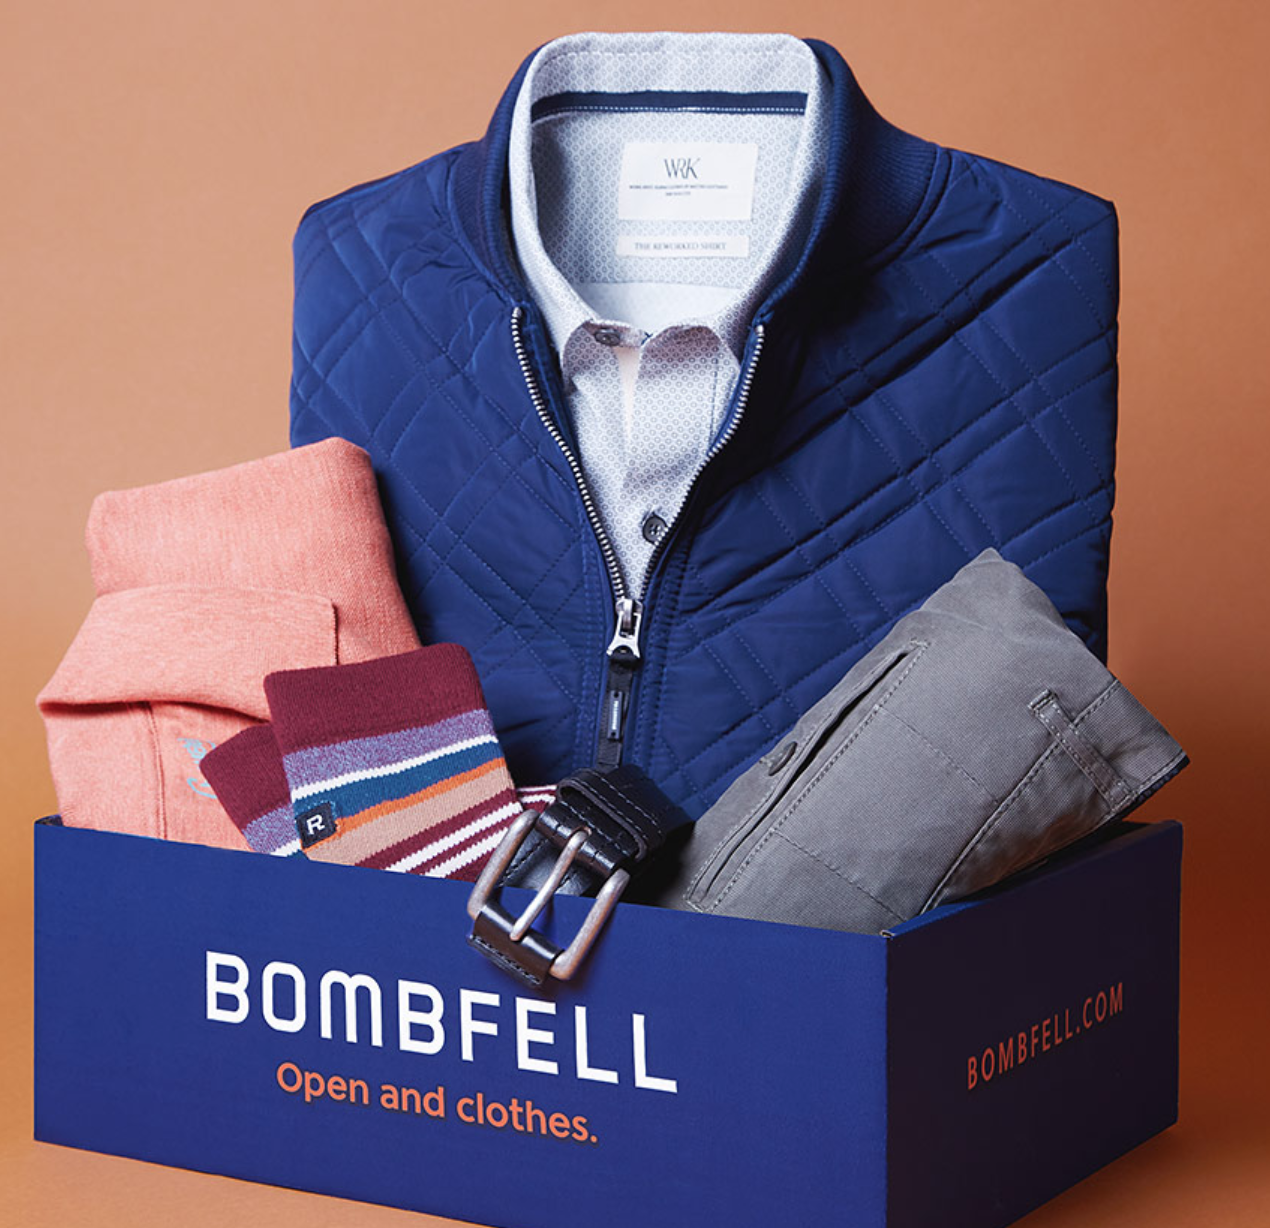 Bombfell Men’s Clothing Box Coupon – $25 Off First Purchase!